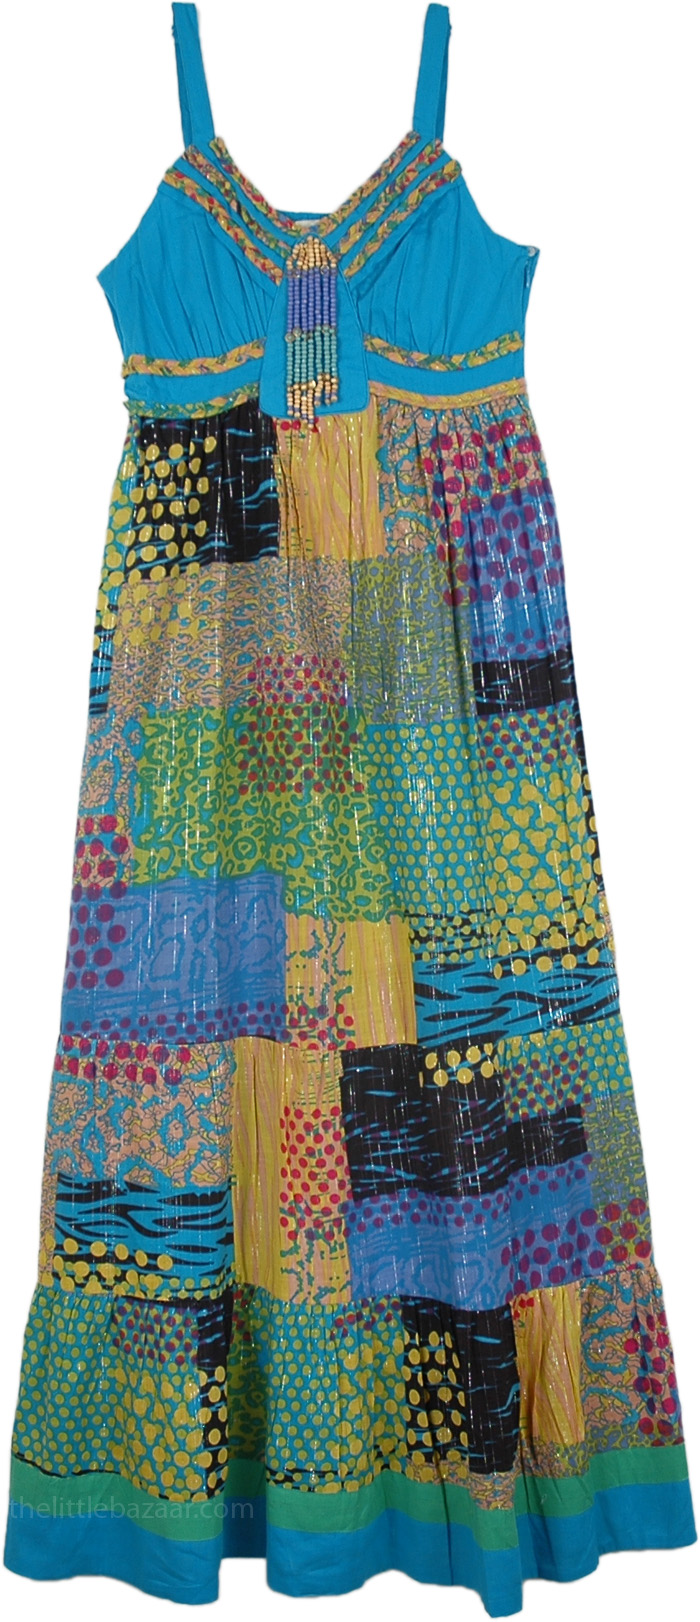 Tinsel Patchwork Ethnic Dress in Ocean Blue, Blue Chill Bohemian Patchwork Long Sundress